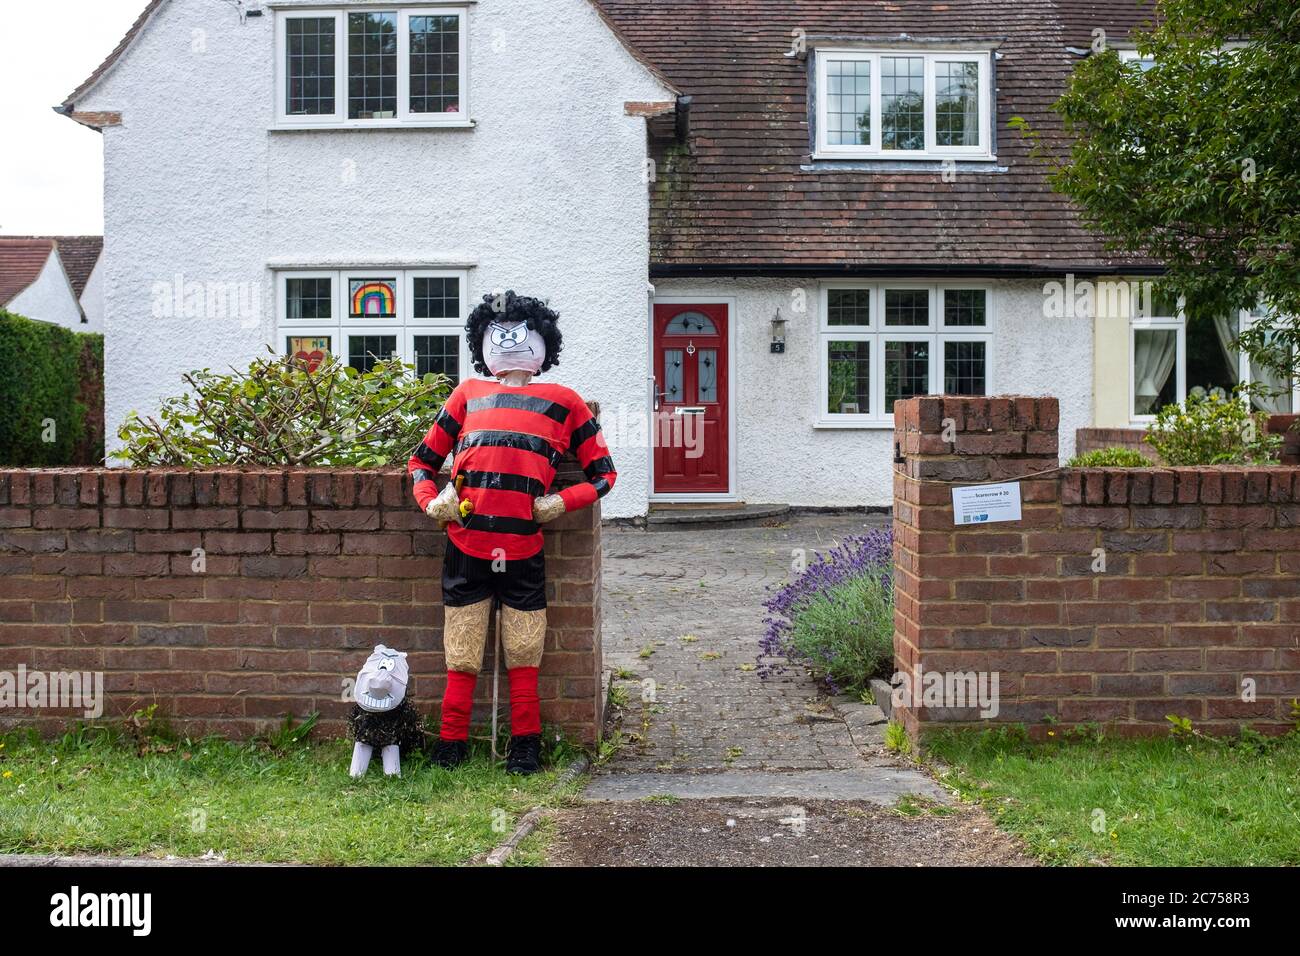 Novelty scarecrow on display outside house during annual scarecrow festival in village of Holwell, near Hitchin, Hertfordshire. Stock Photo